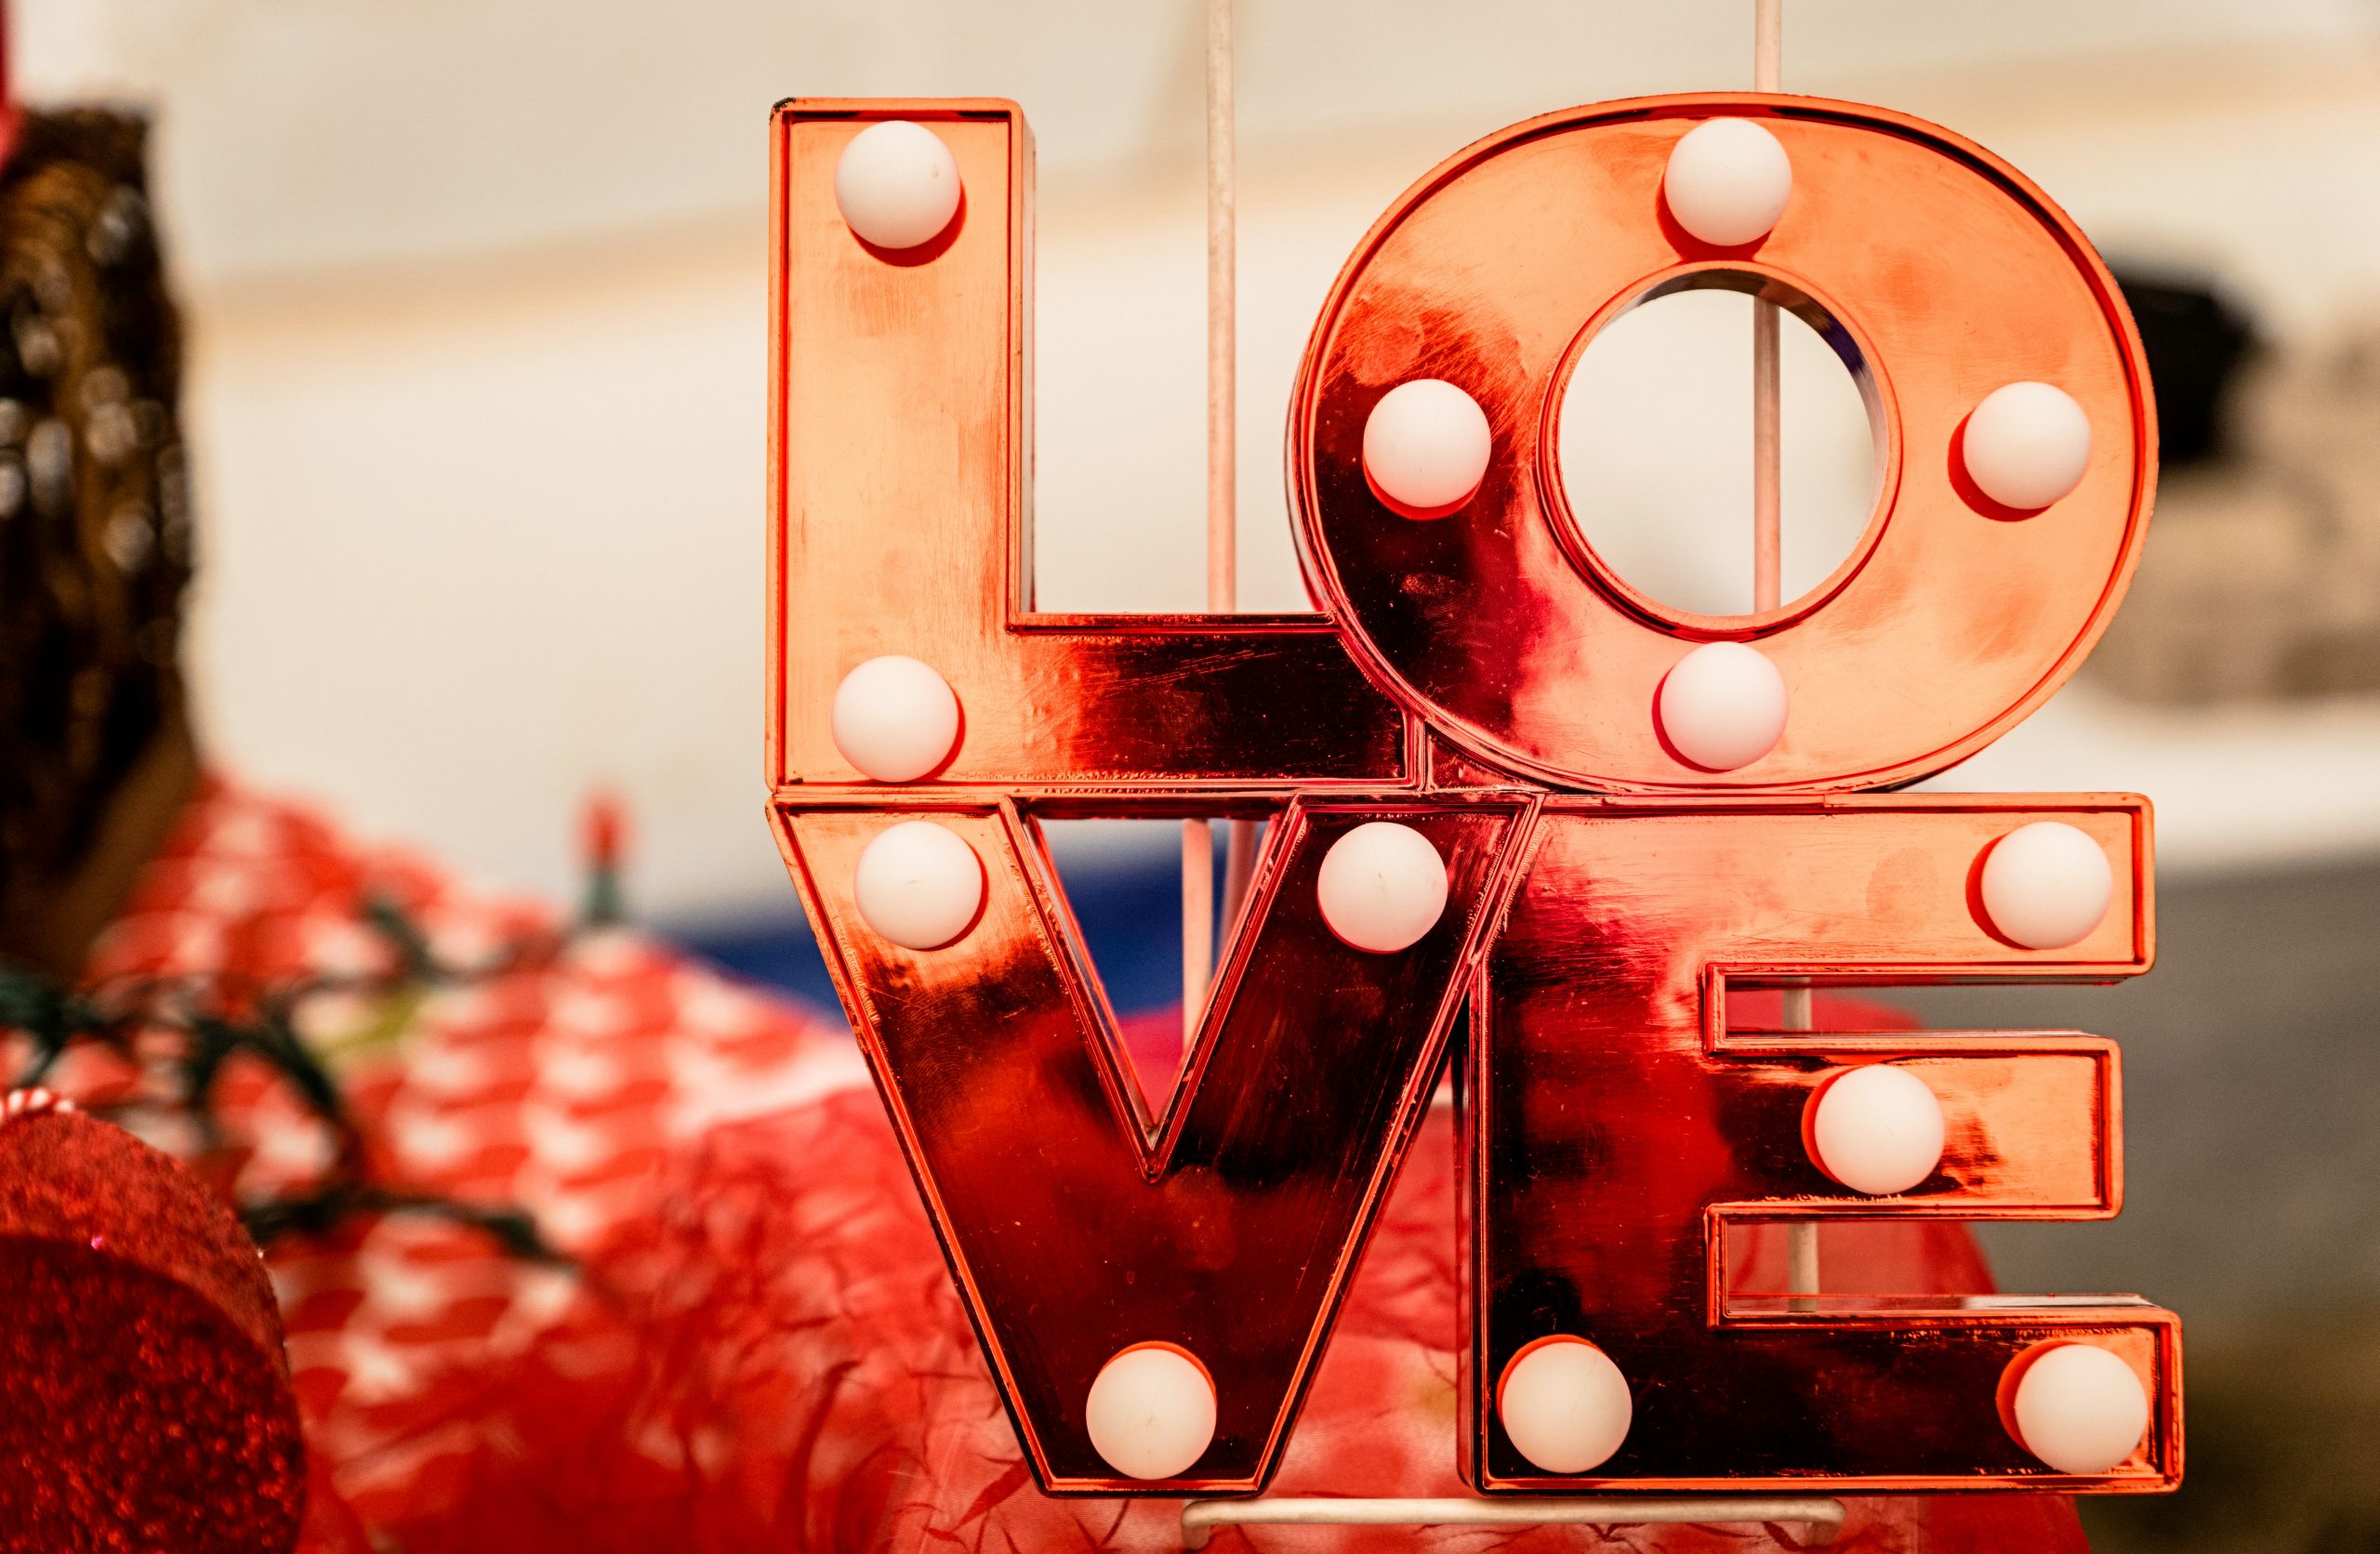 It’s Valentines – Love is in the air